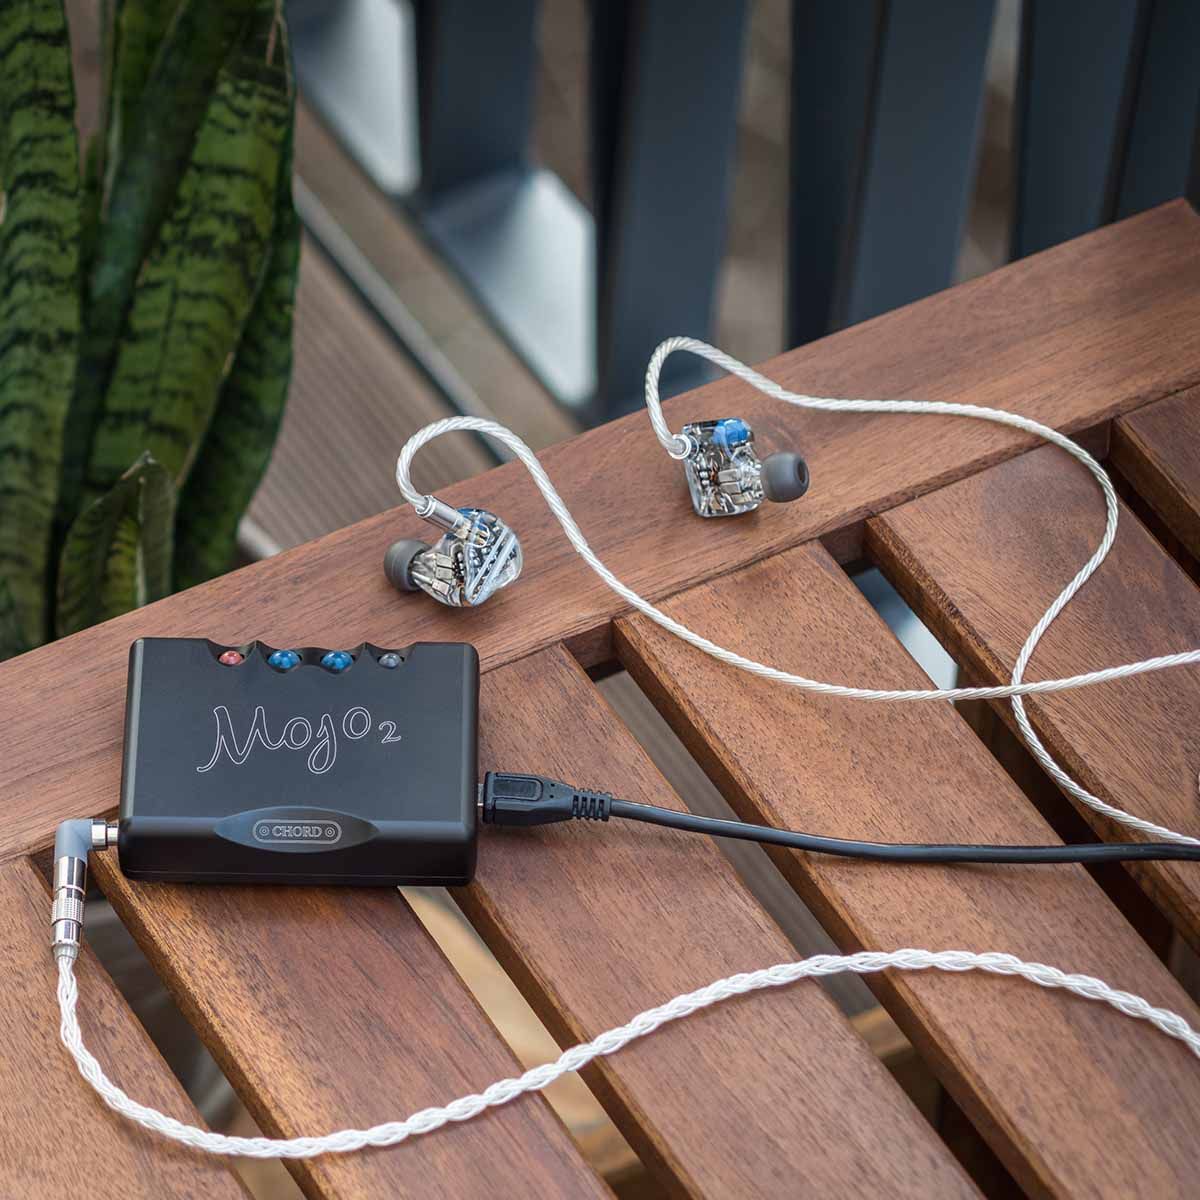 Chord Mojo 2 connected to in-ear headphones sitting on patio table outside